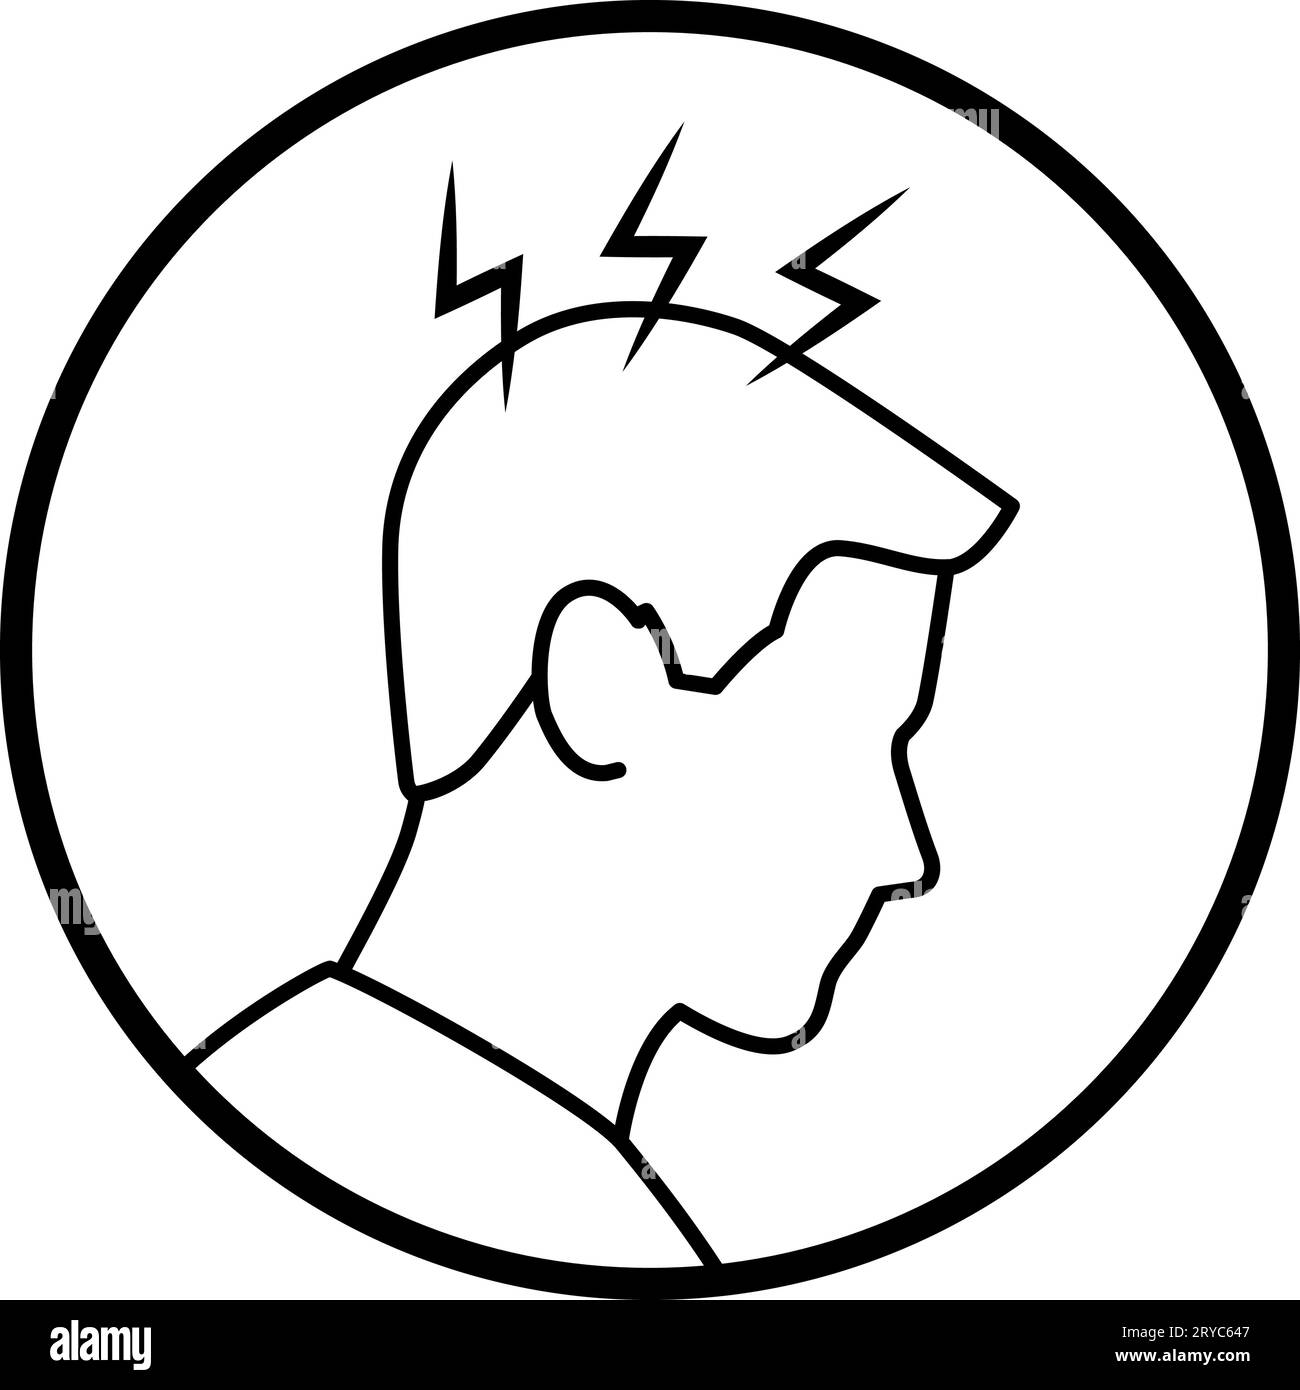 Man with headache, isolated medical icon Stock Vector